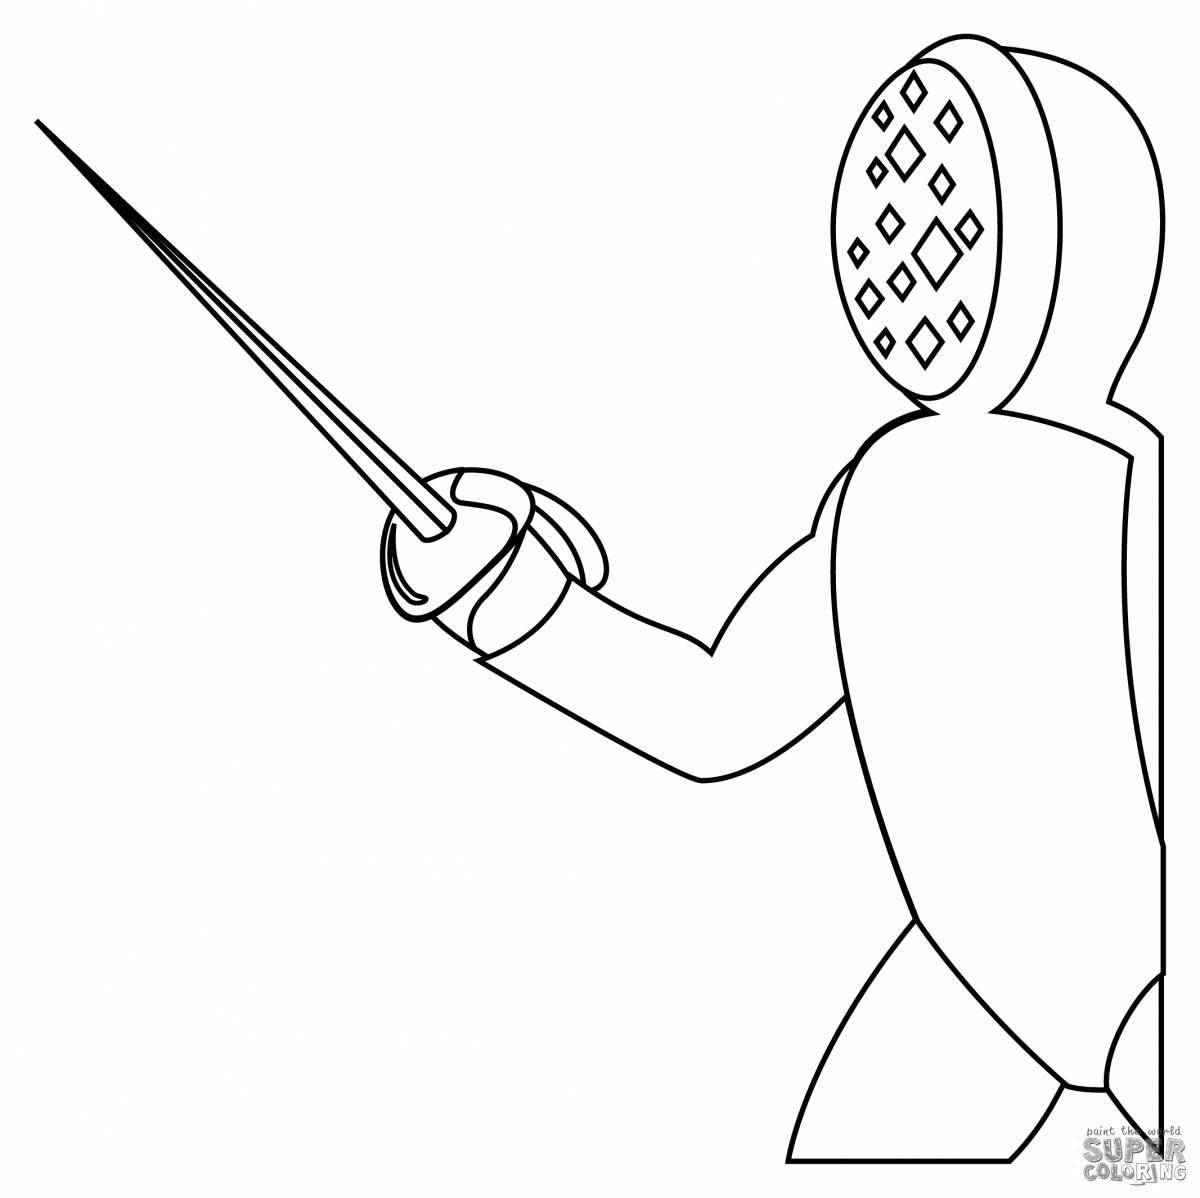 Live fencing coloring page